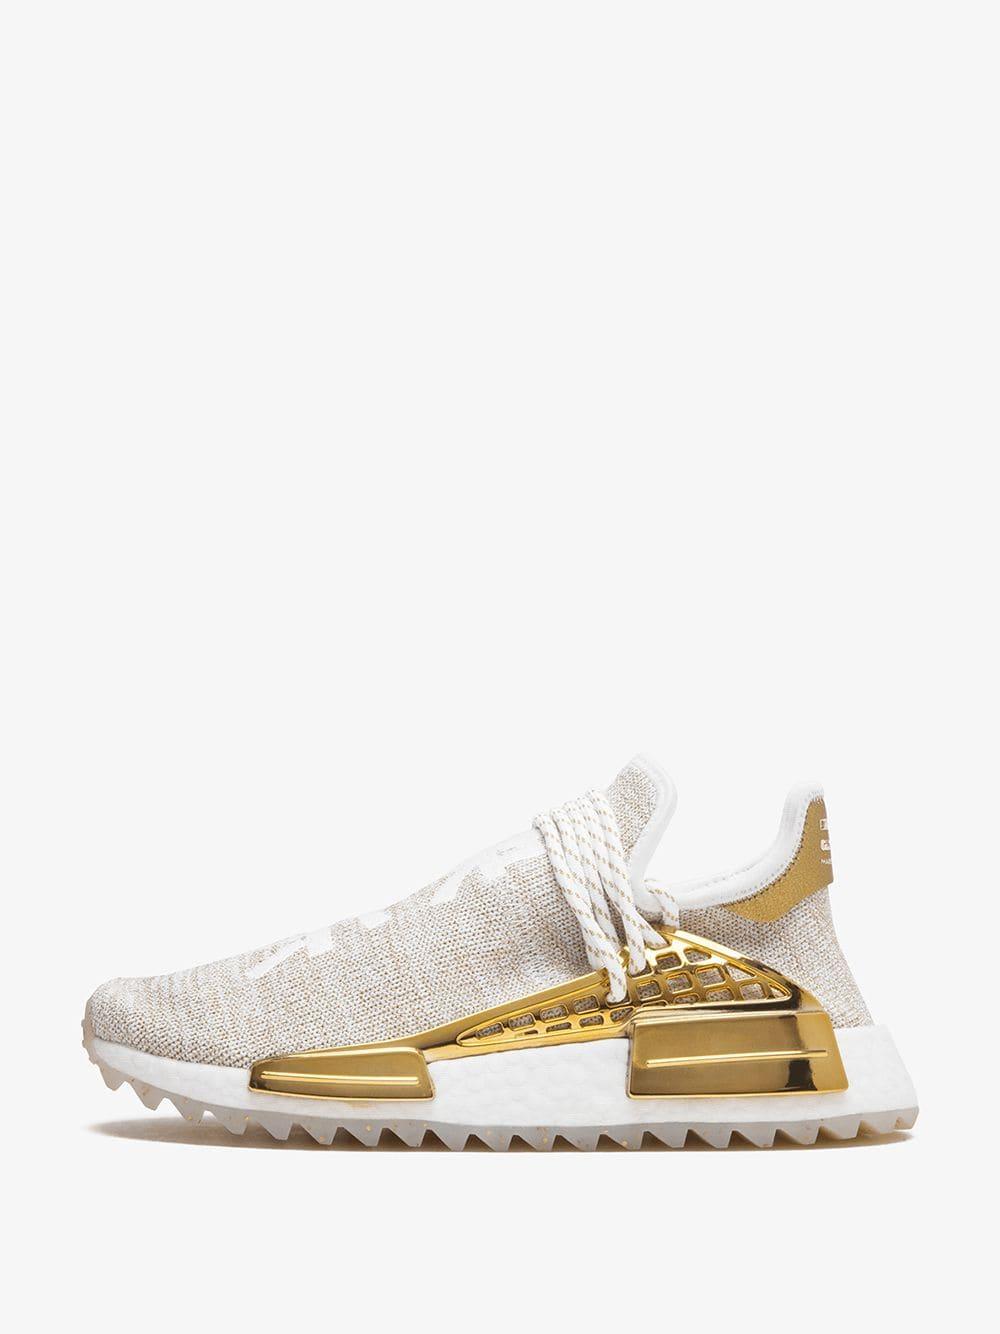 adidas Gold And White X Pharrell Williams Hu Holi Nmd in Metallic for Men - Lyst